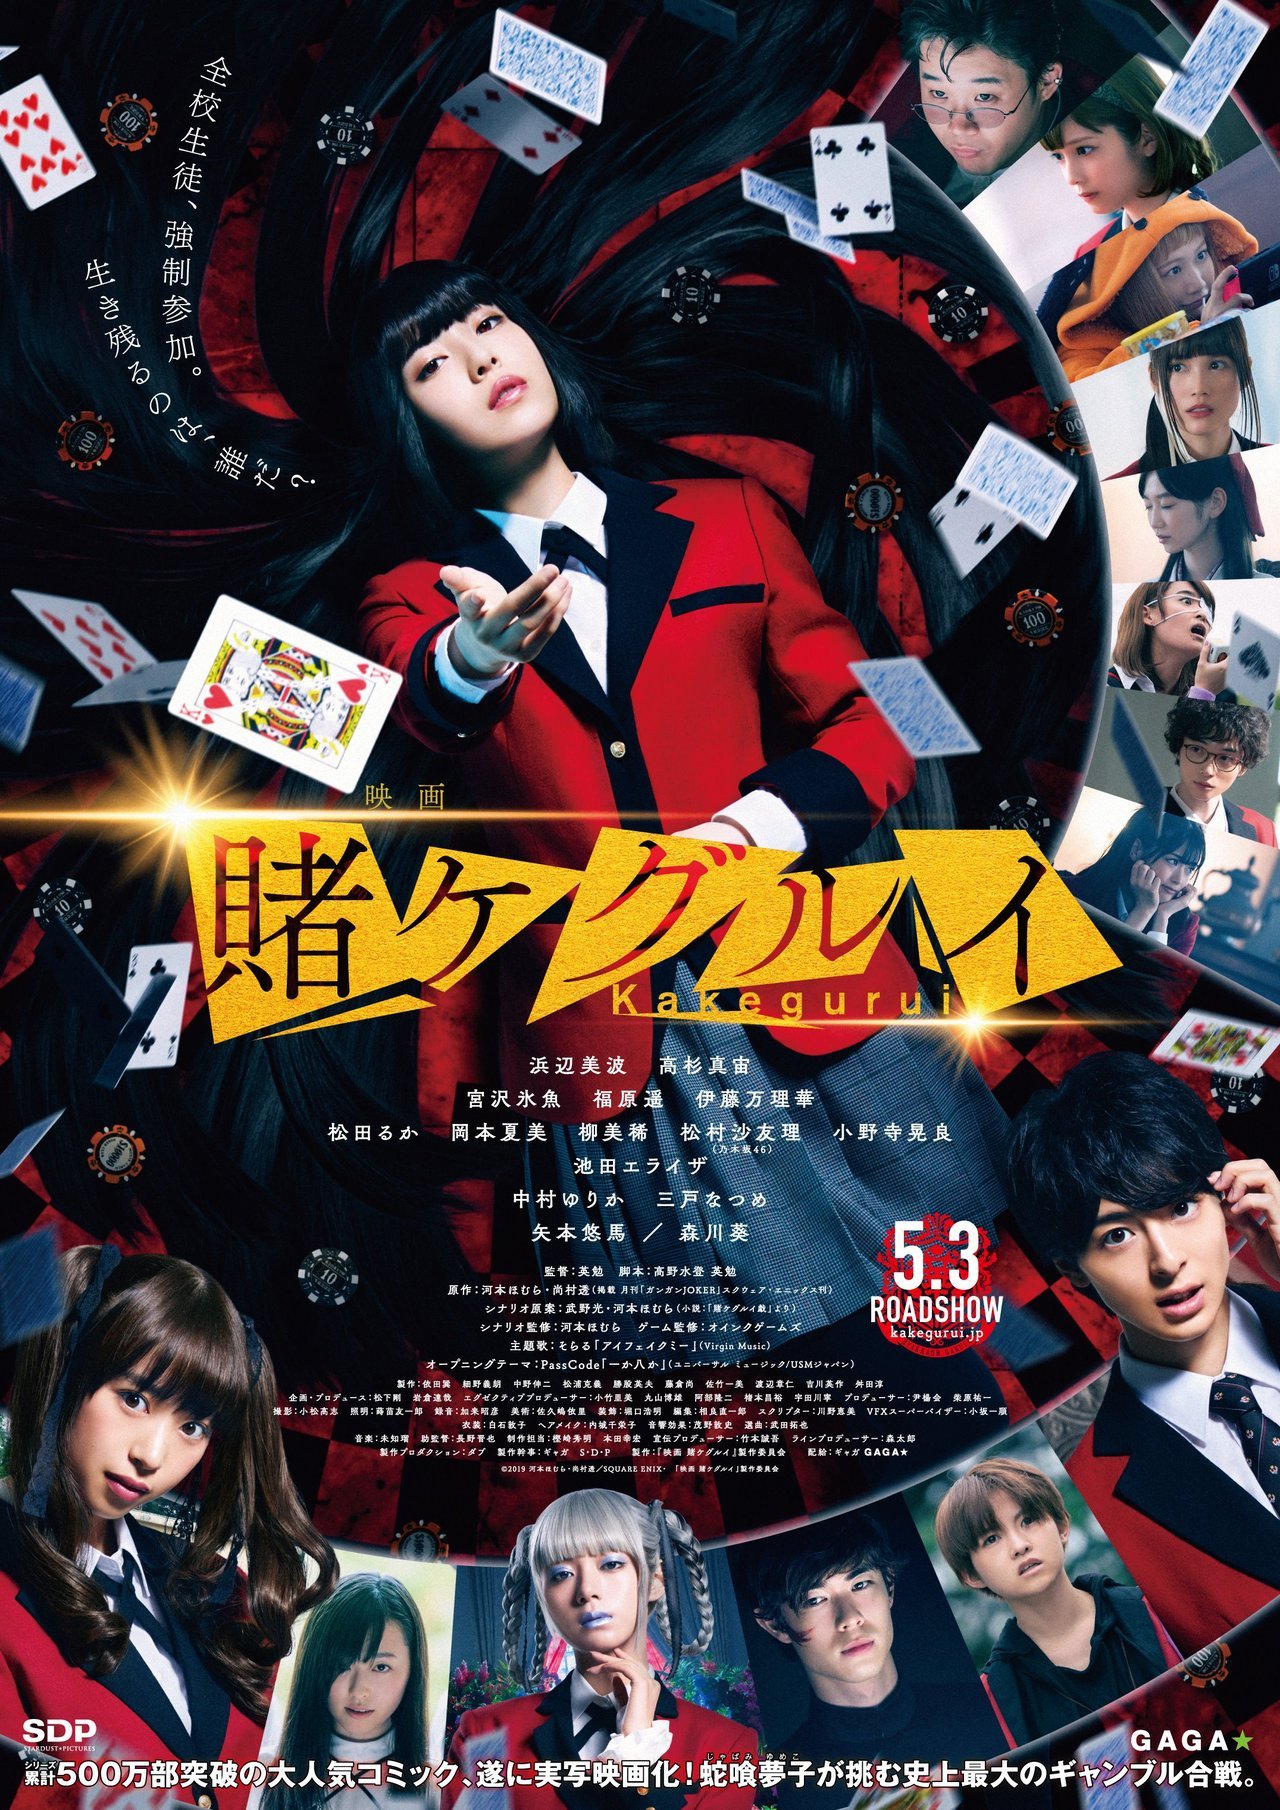 A new visual and PV for the live-action â��Kakeguruiâ�� movie has been released. It will premiere in Japanese theaters May 3rd.
A second season of the live-action TV drama series is scheduled to air on March 31st.